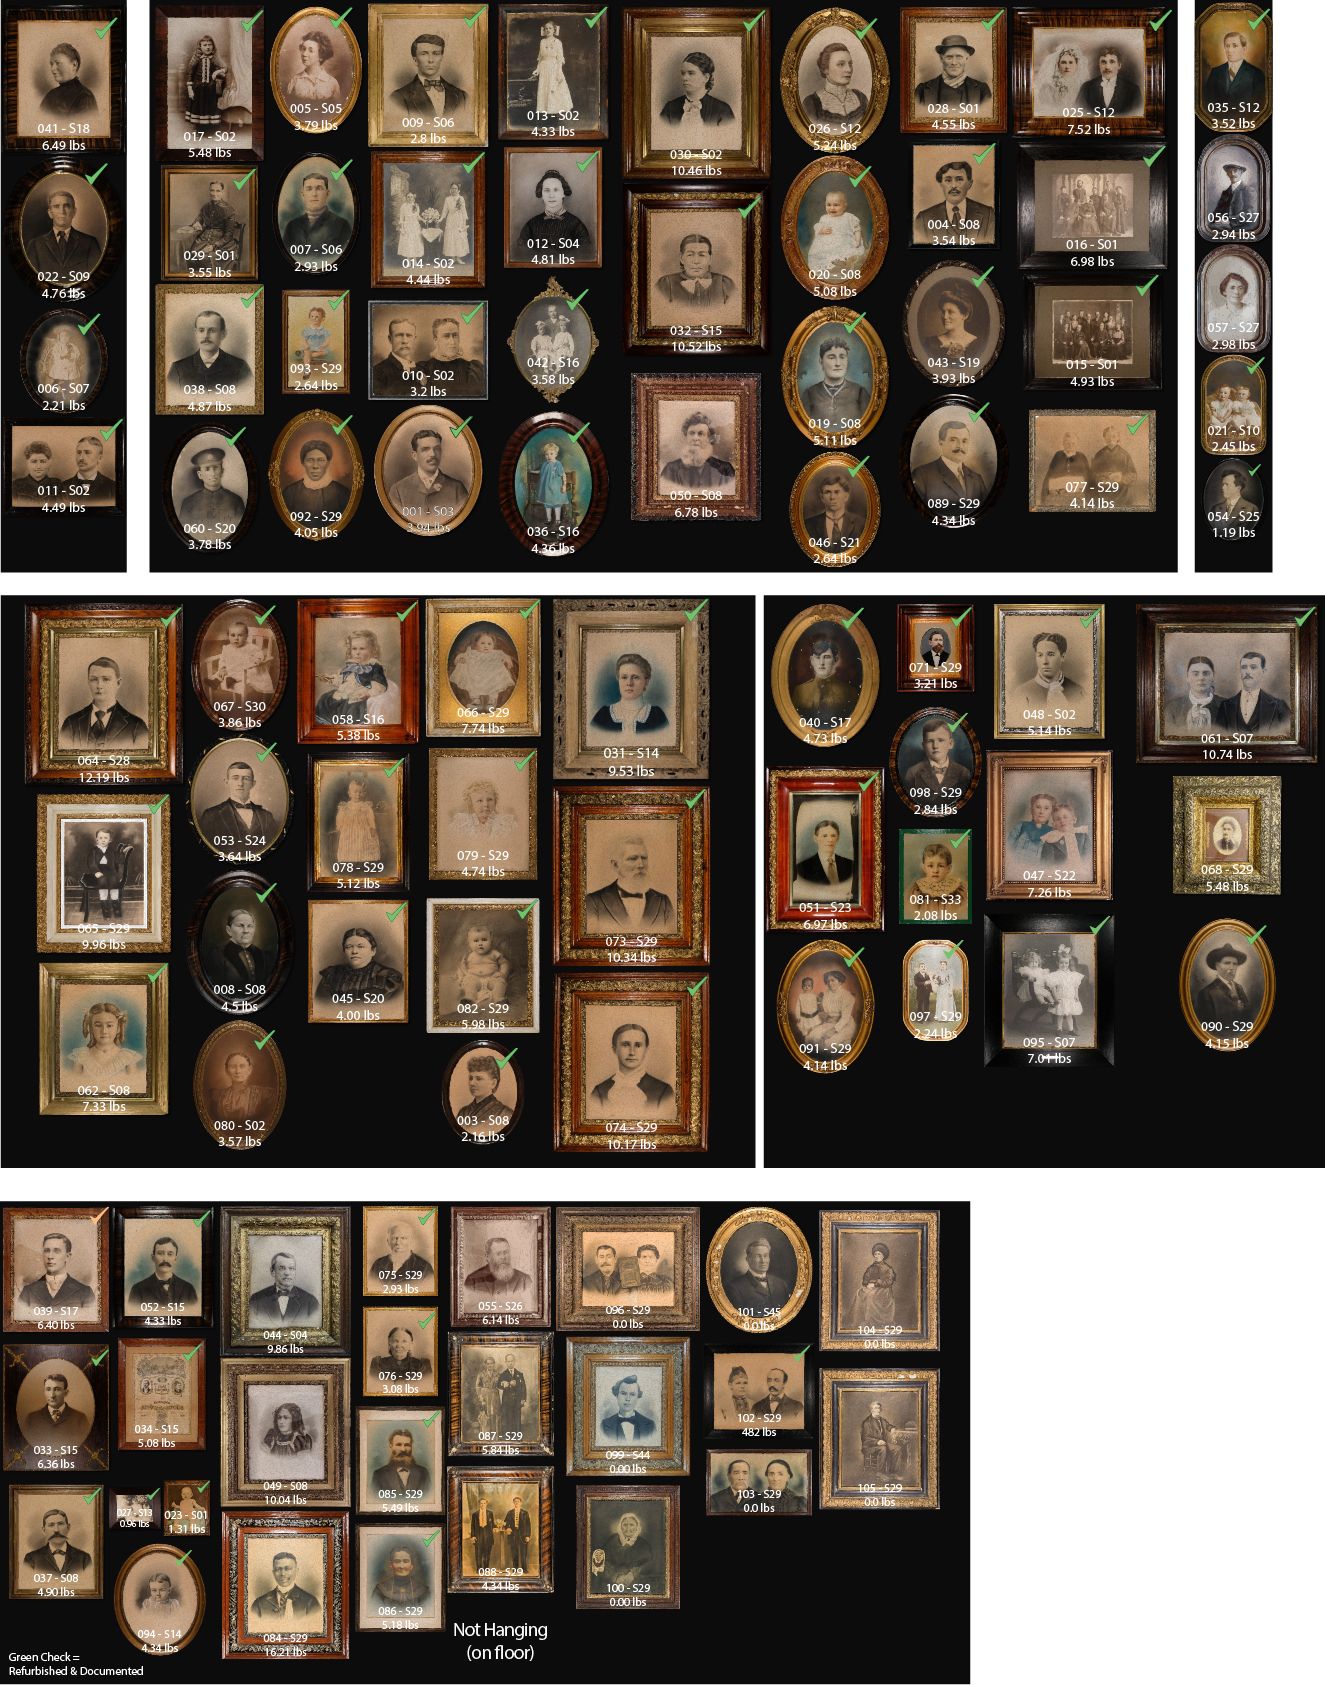 The current collection of 97 frames